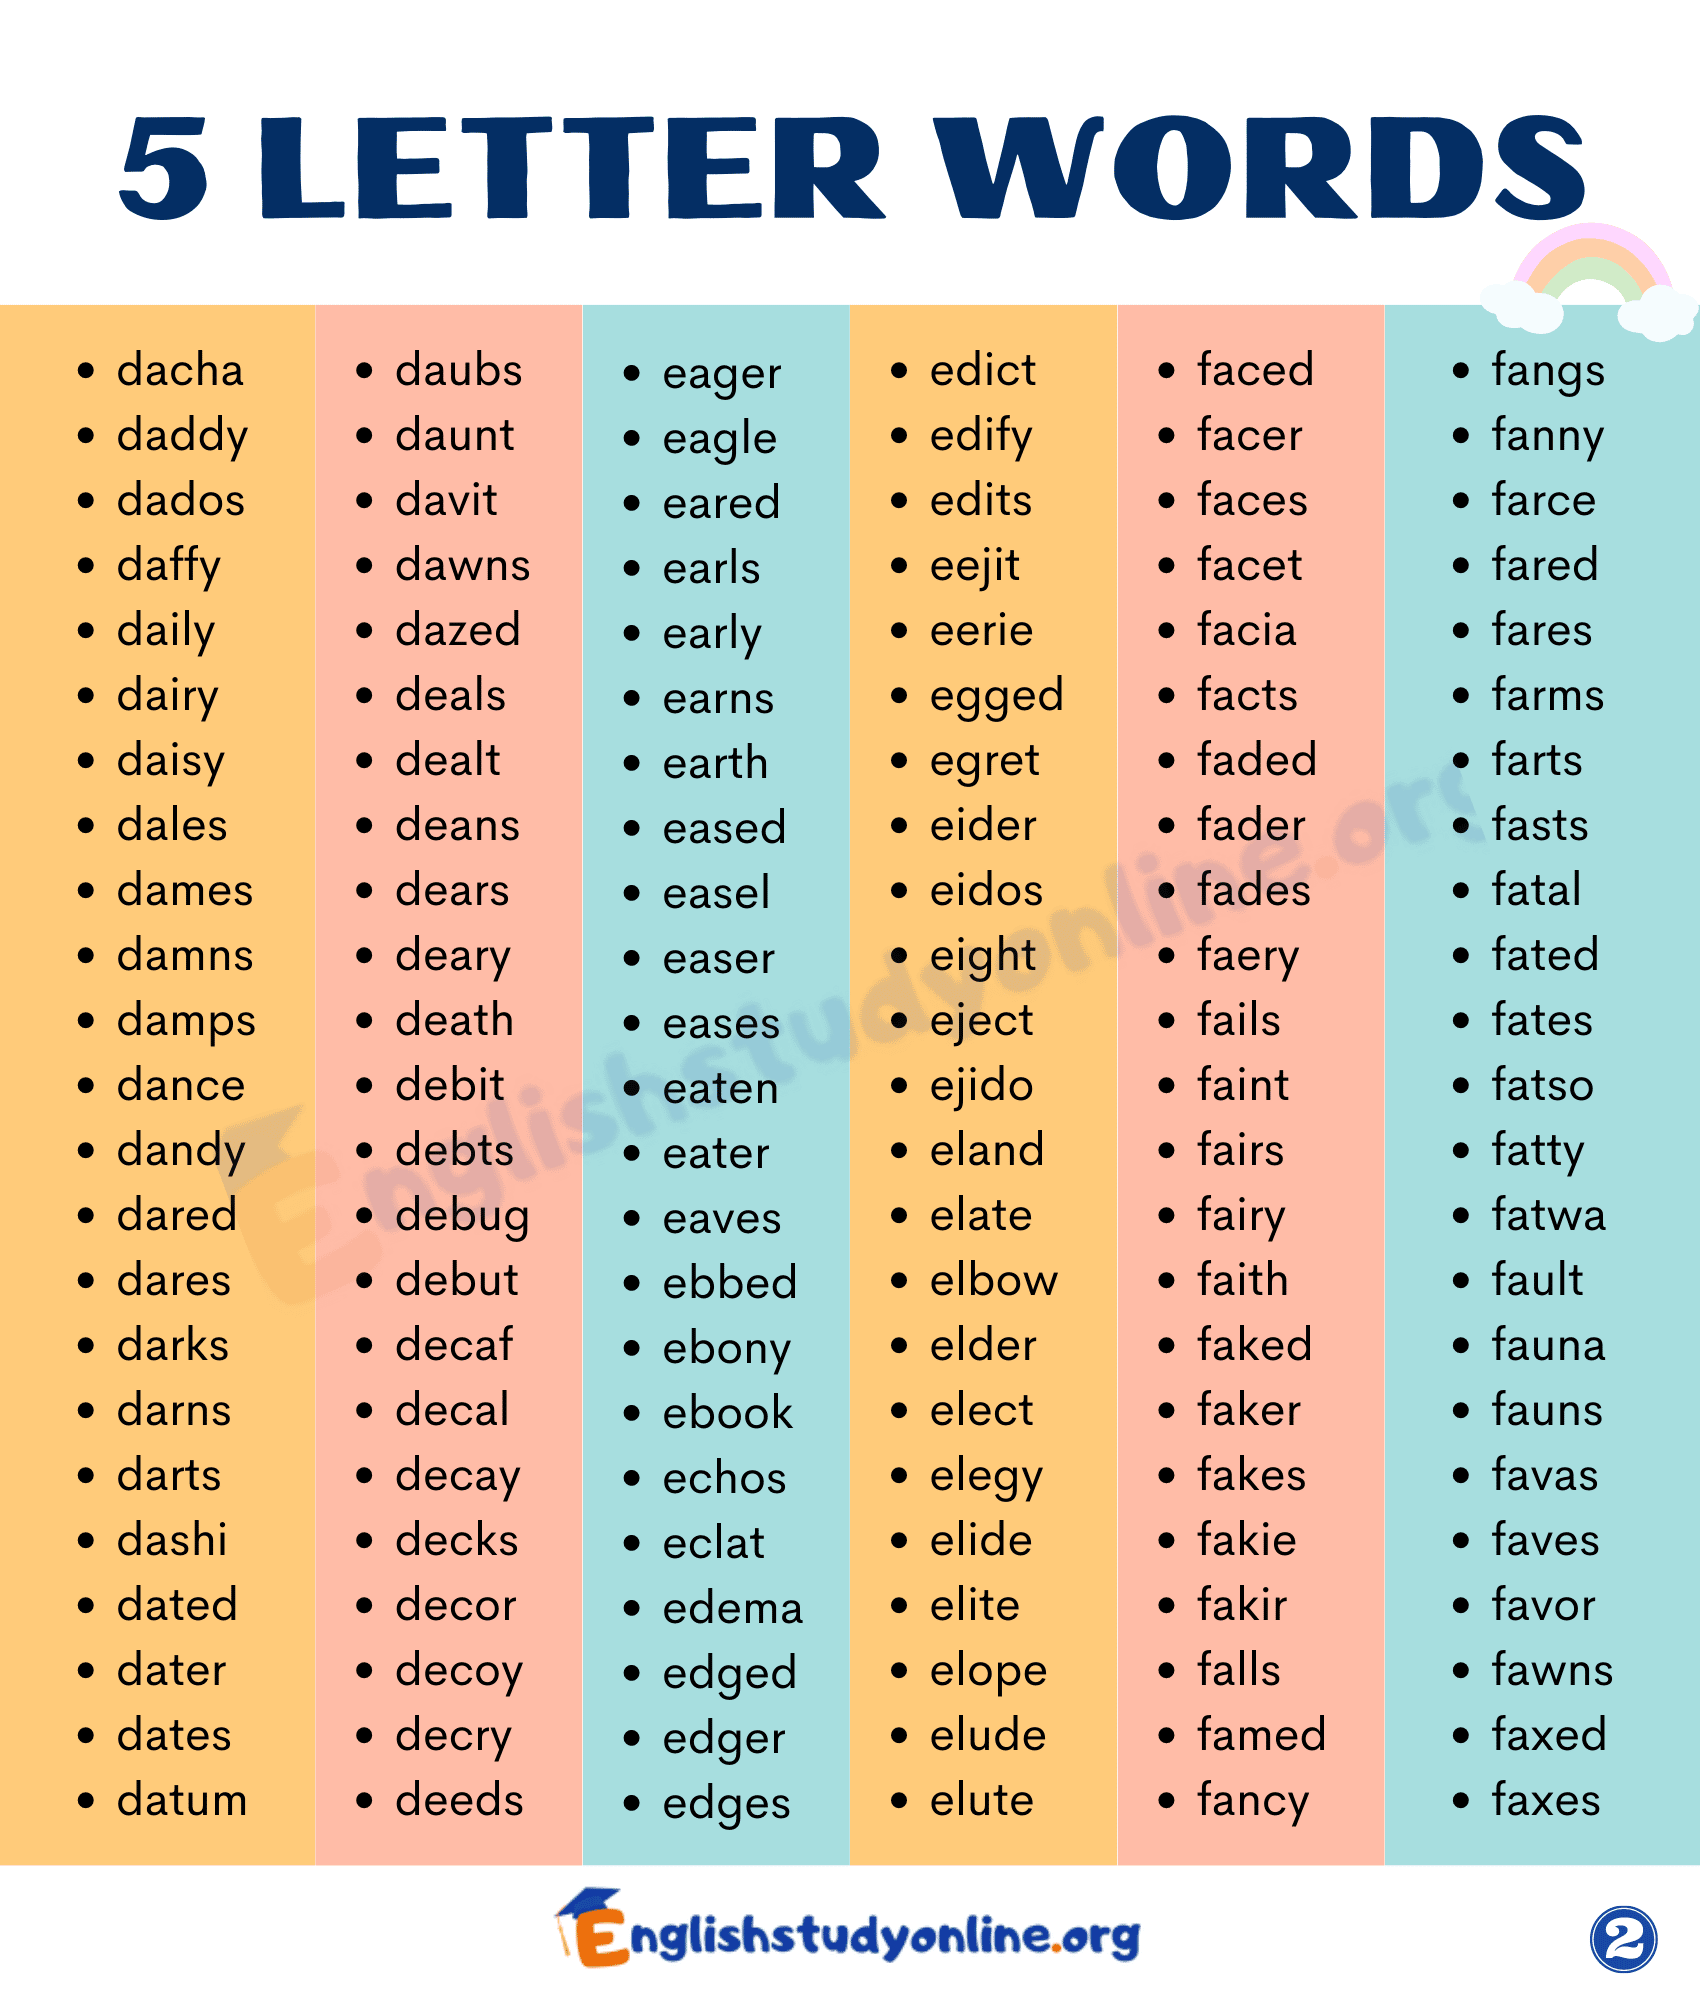 letter words containing